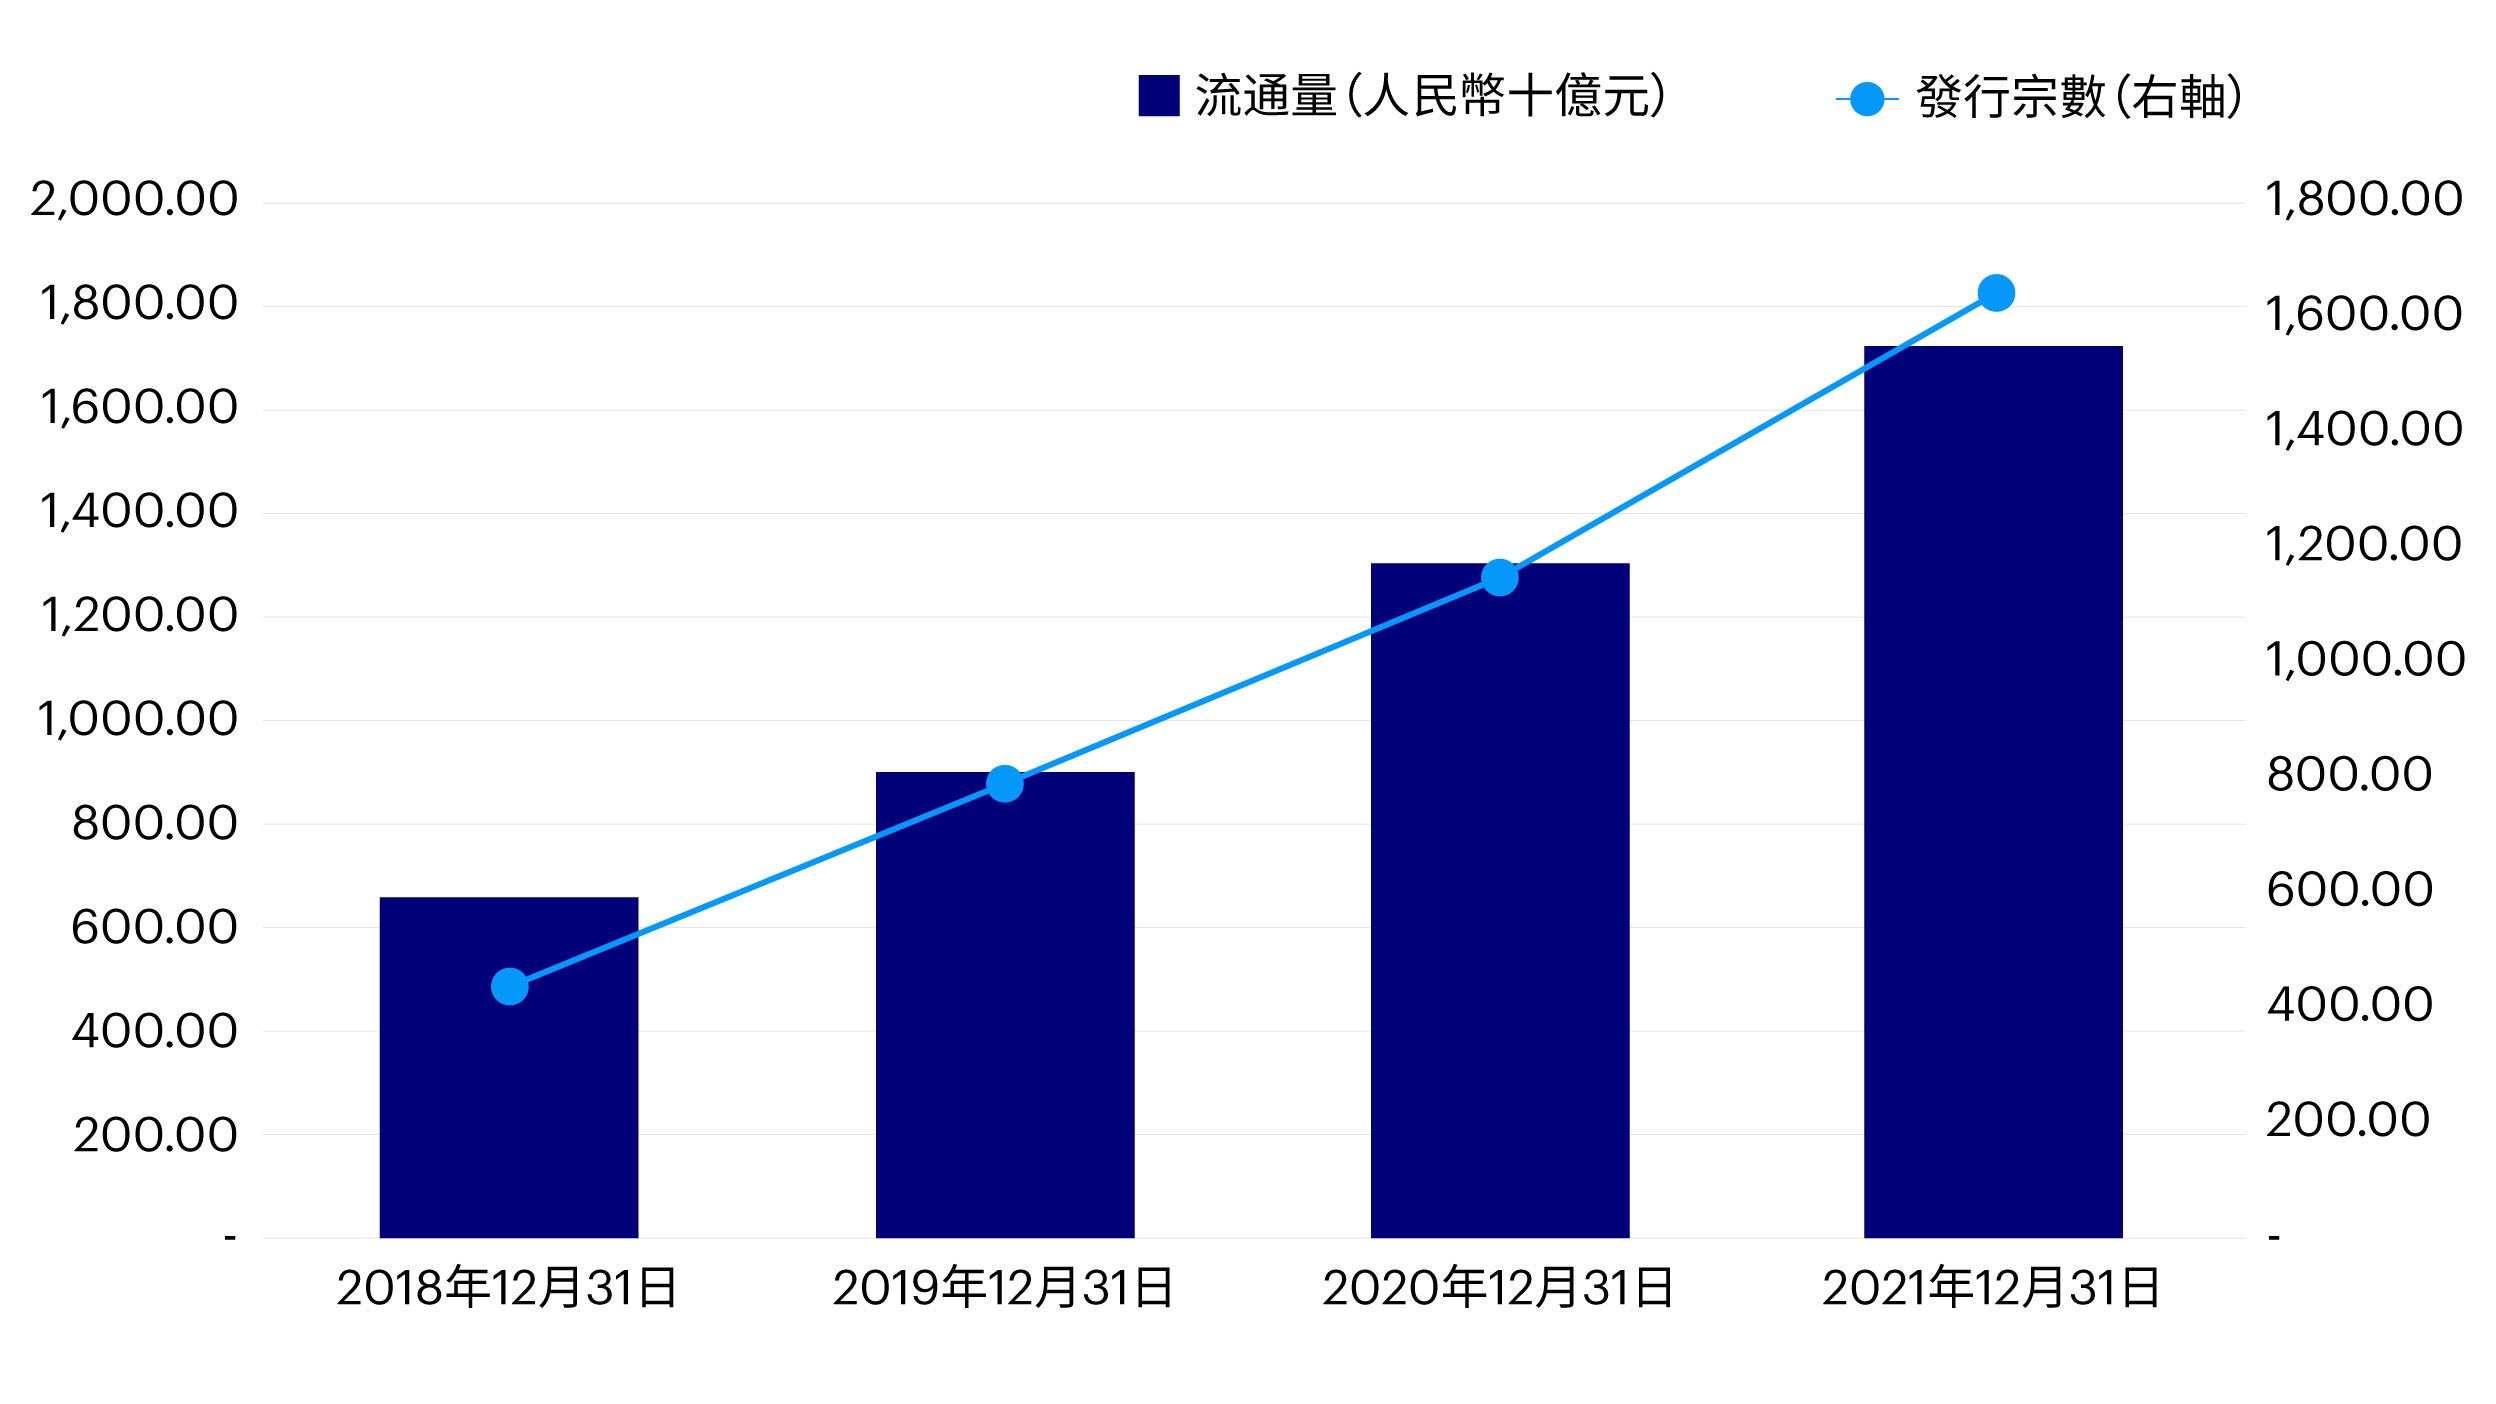 Figure 1: Value of China green bonds outstanding (2018-2021)